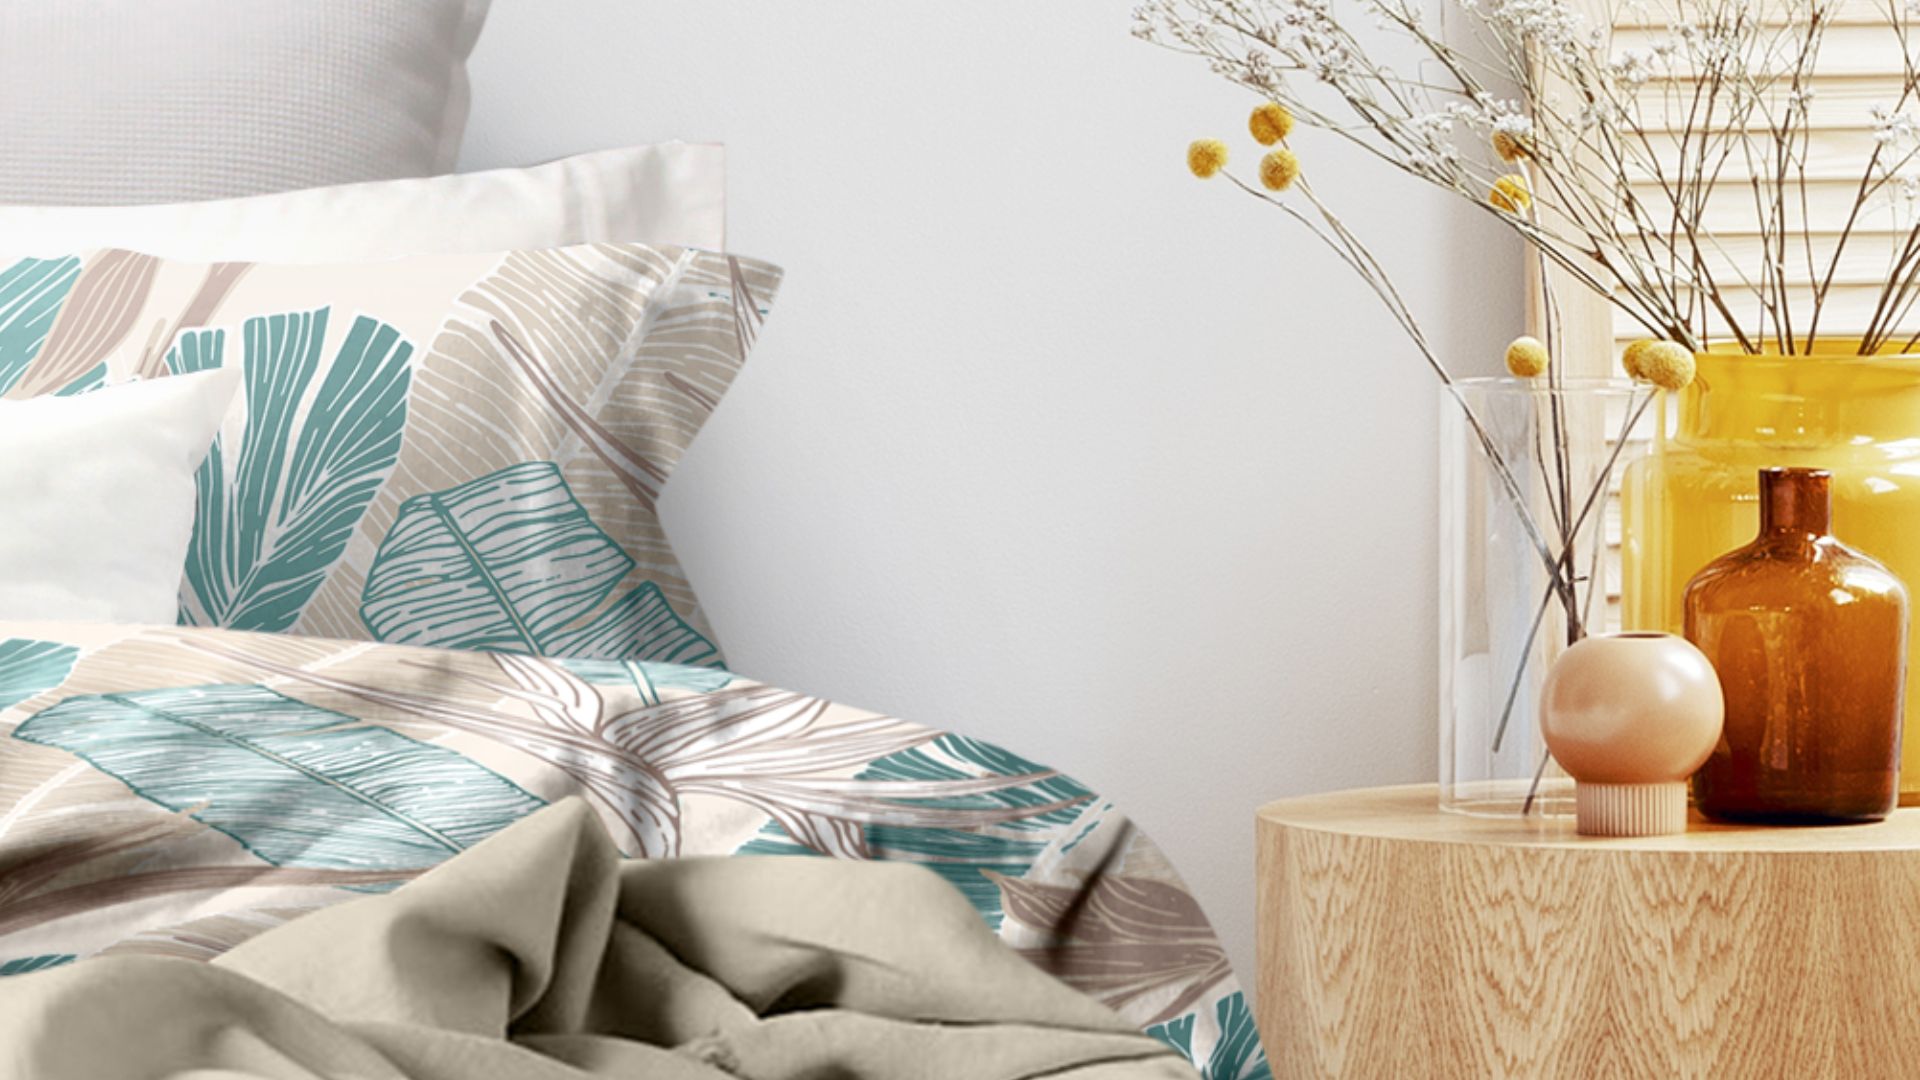 Bedside table styling ideas guide for practicality & style